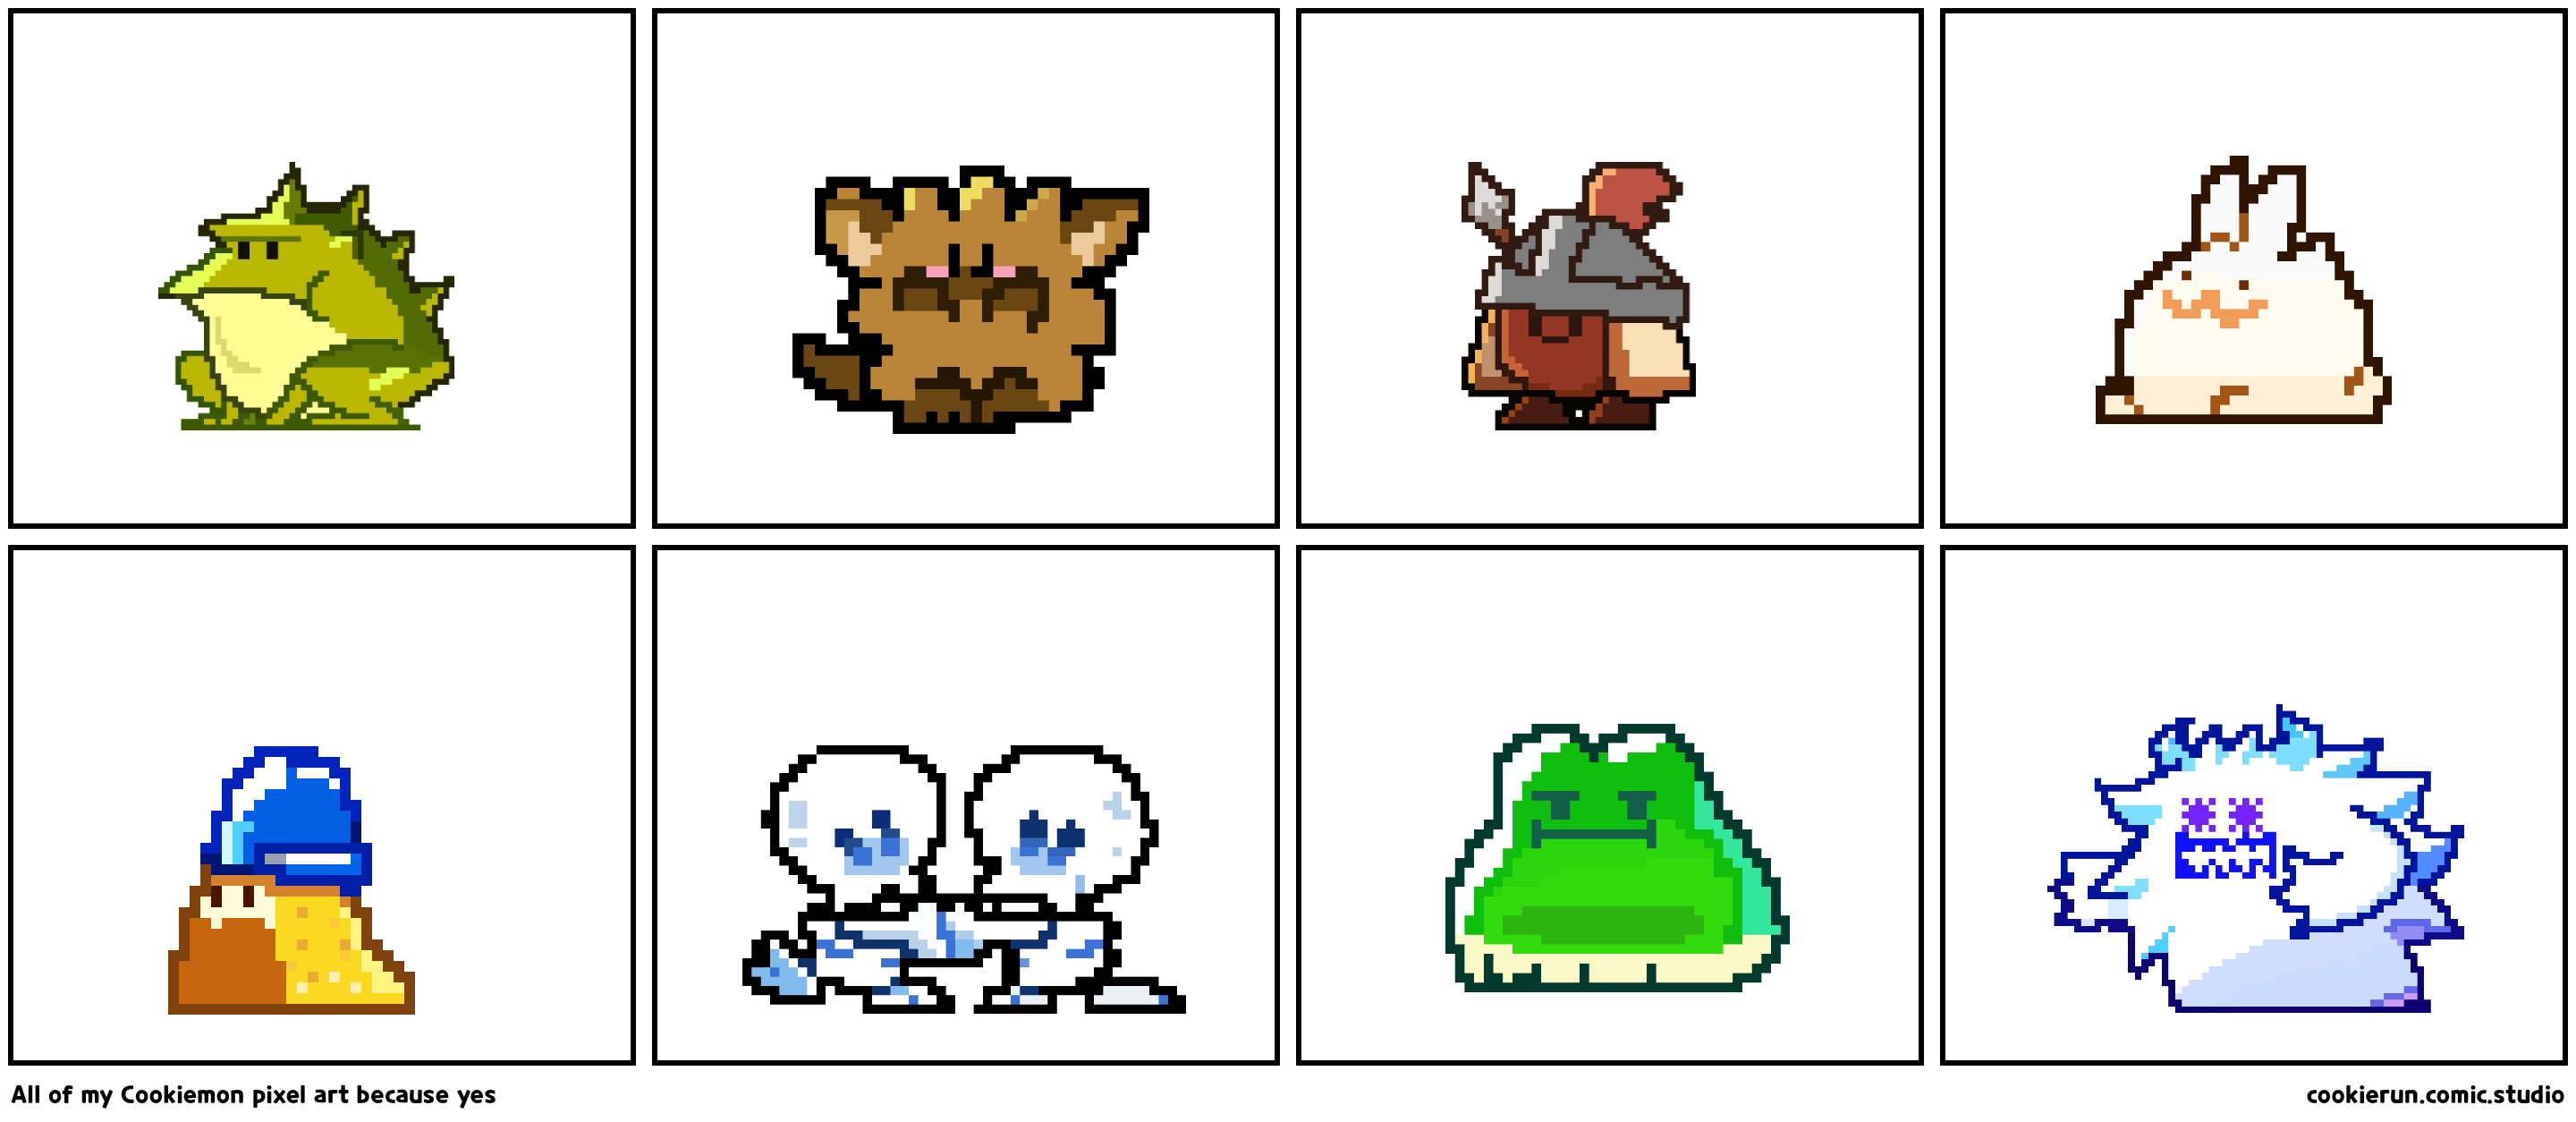 All of my Cookiemon pixel art because yes